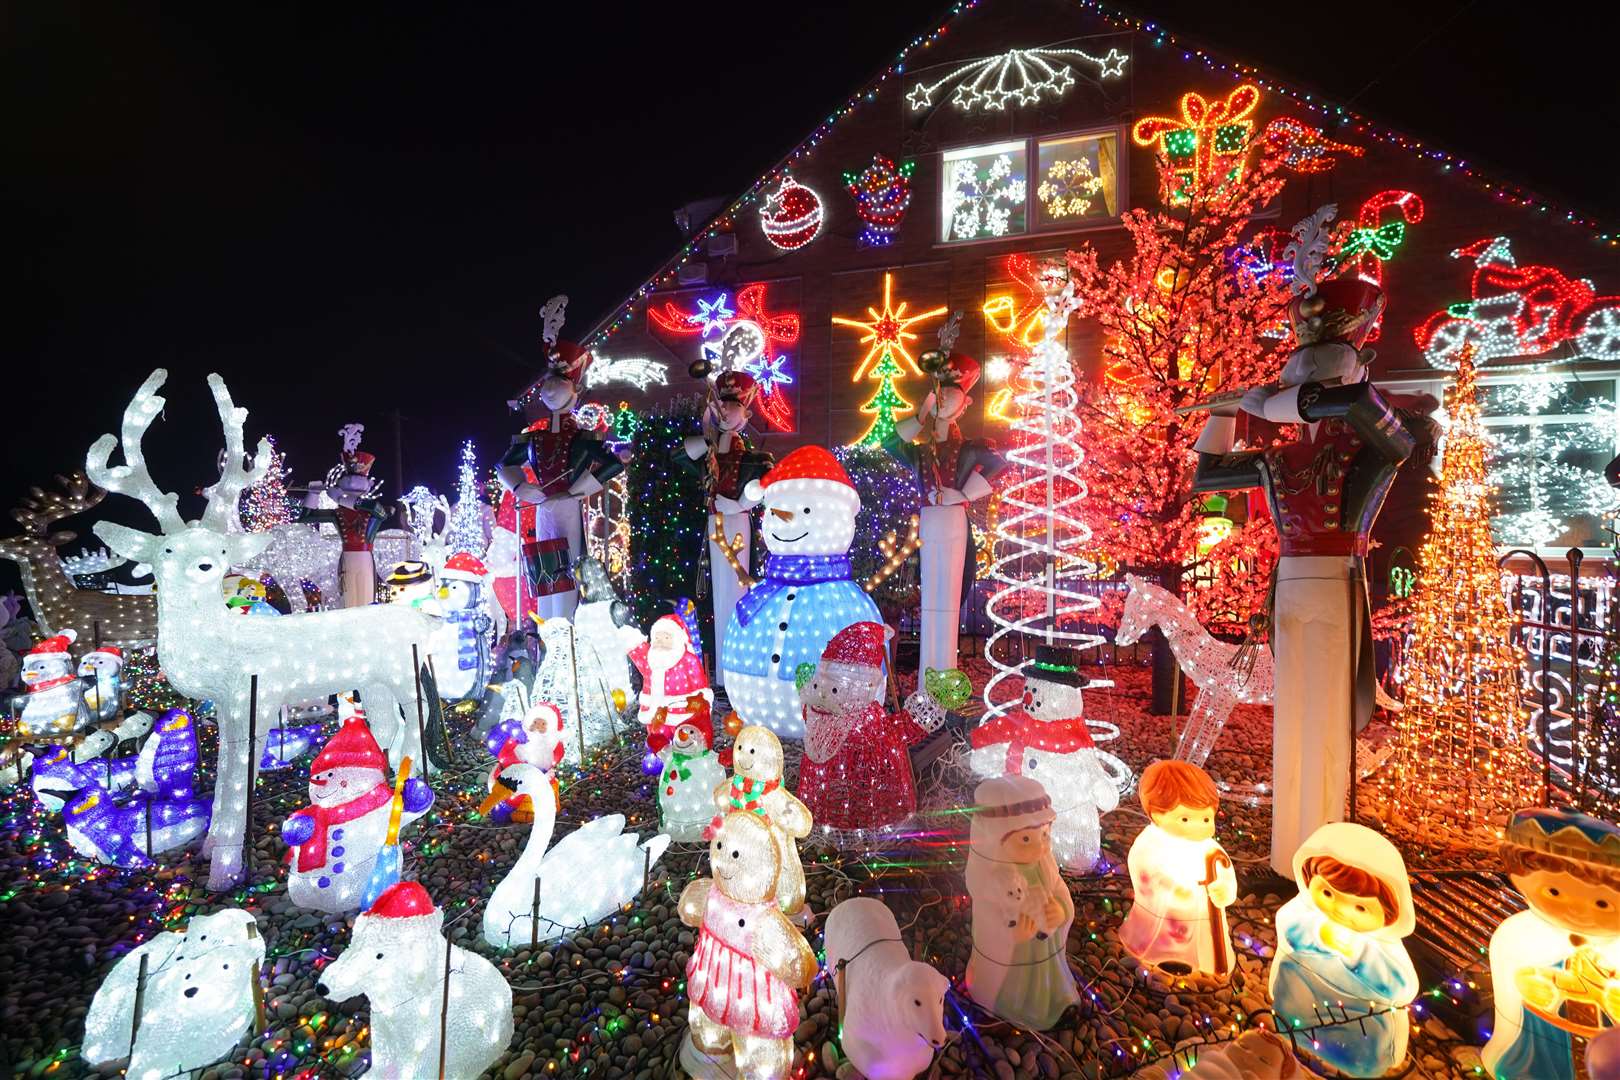 Helen and John Attlesey in Soham, Cambridgeshire, decorate their house every year to raise money for charity. The money raised is donated to East Anglia Children’s Hospices, Great Ormond Street Hospital Children’s Charity and Dreamflight, who helped their grandson Jacob recover from a serious form of epilepsy (Joe Giddens/PA)